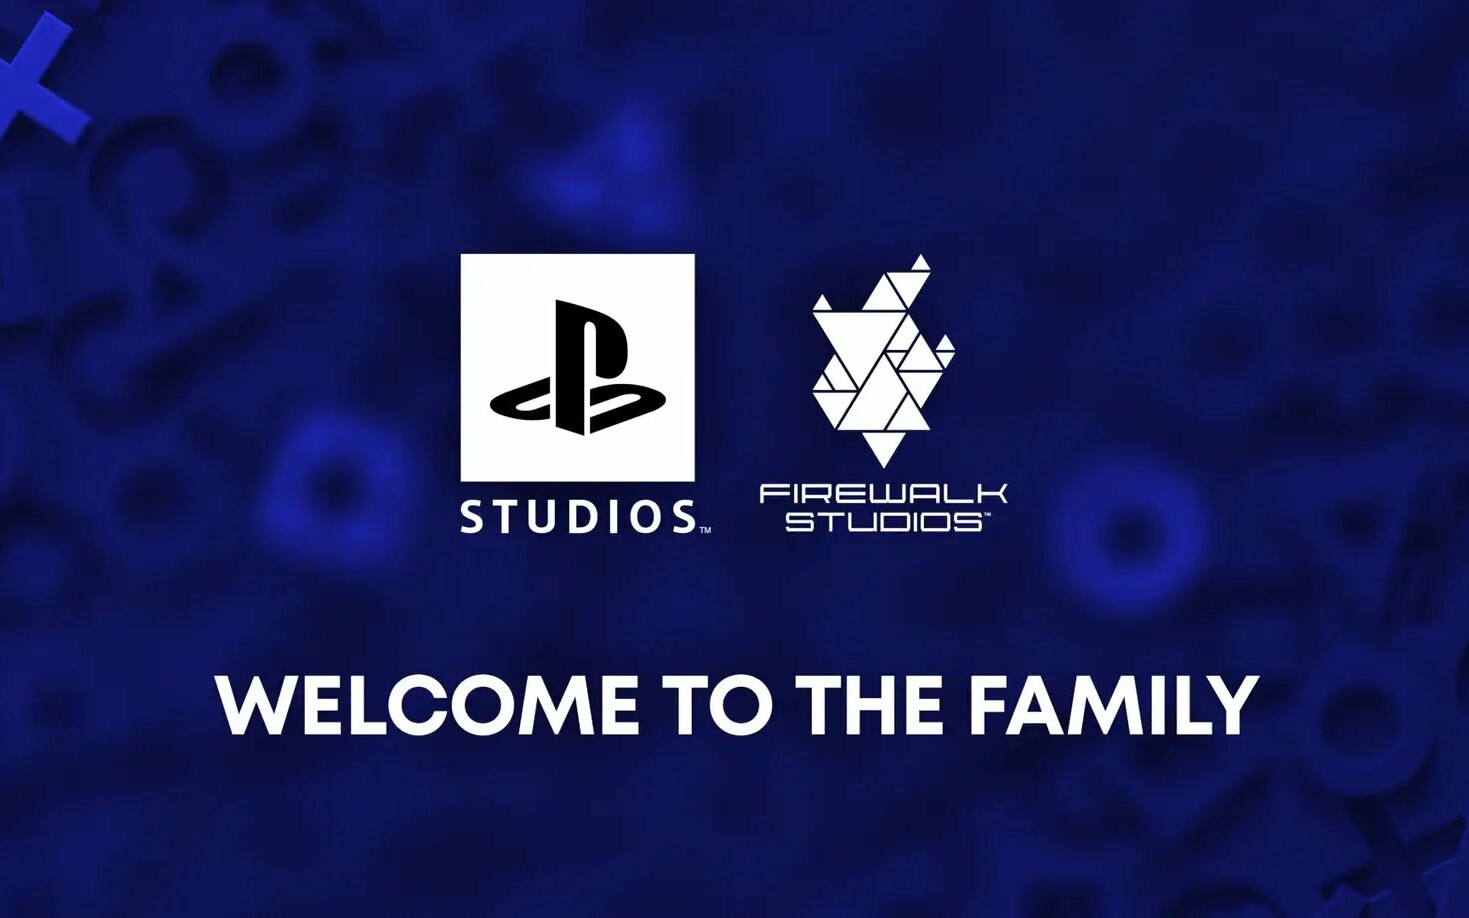 PlayStation Studios has been zoomed in.  Sony has bought Firewalk Studios, which is developing AAA online game for PS5 and PC